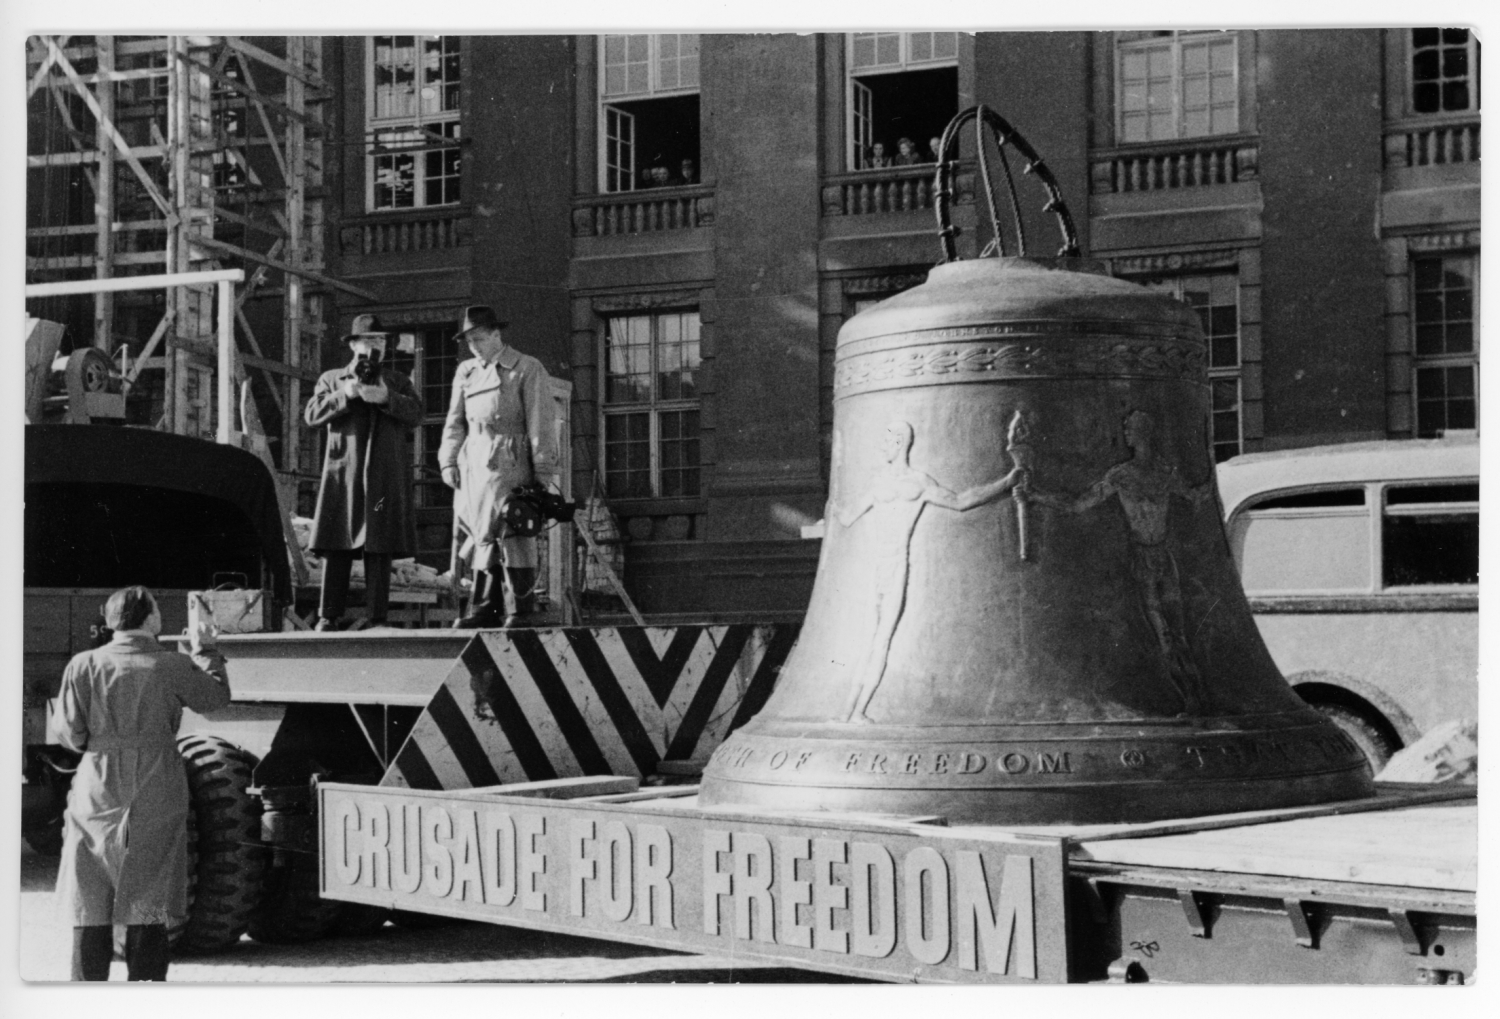 A large bell is being transported on a low loader, on the side is the inscription "Crusade for Freedom". Three men are standing near the bell.